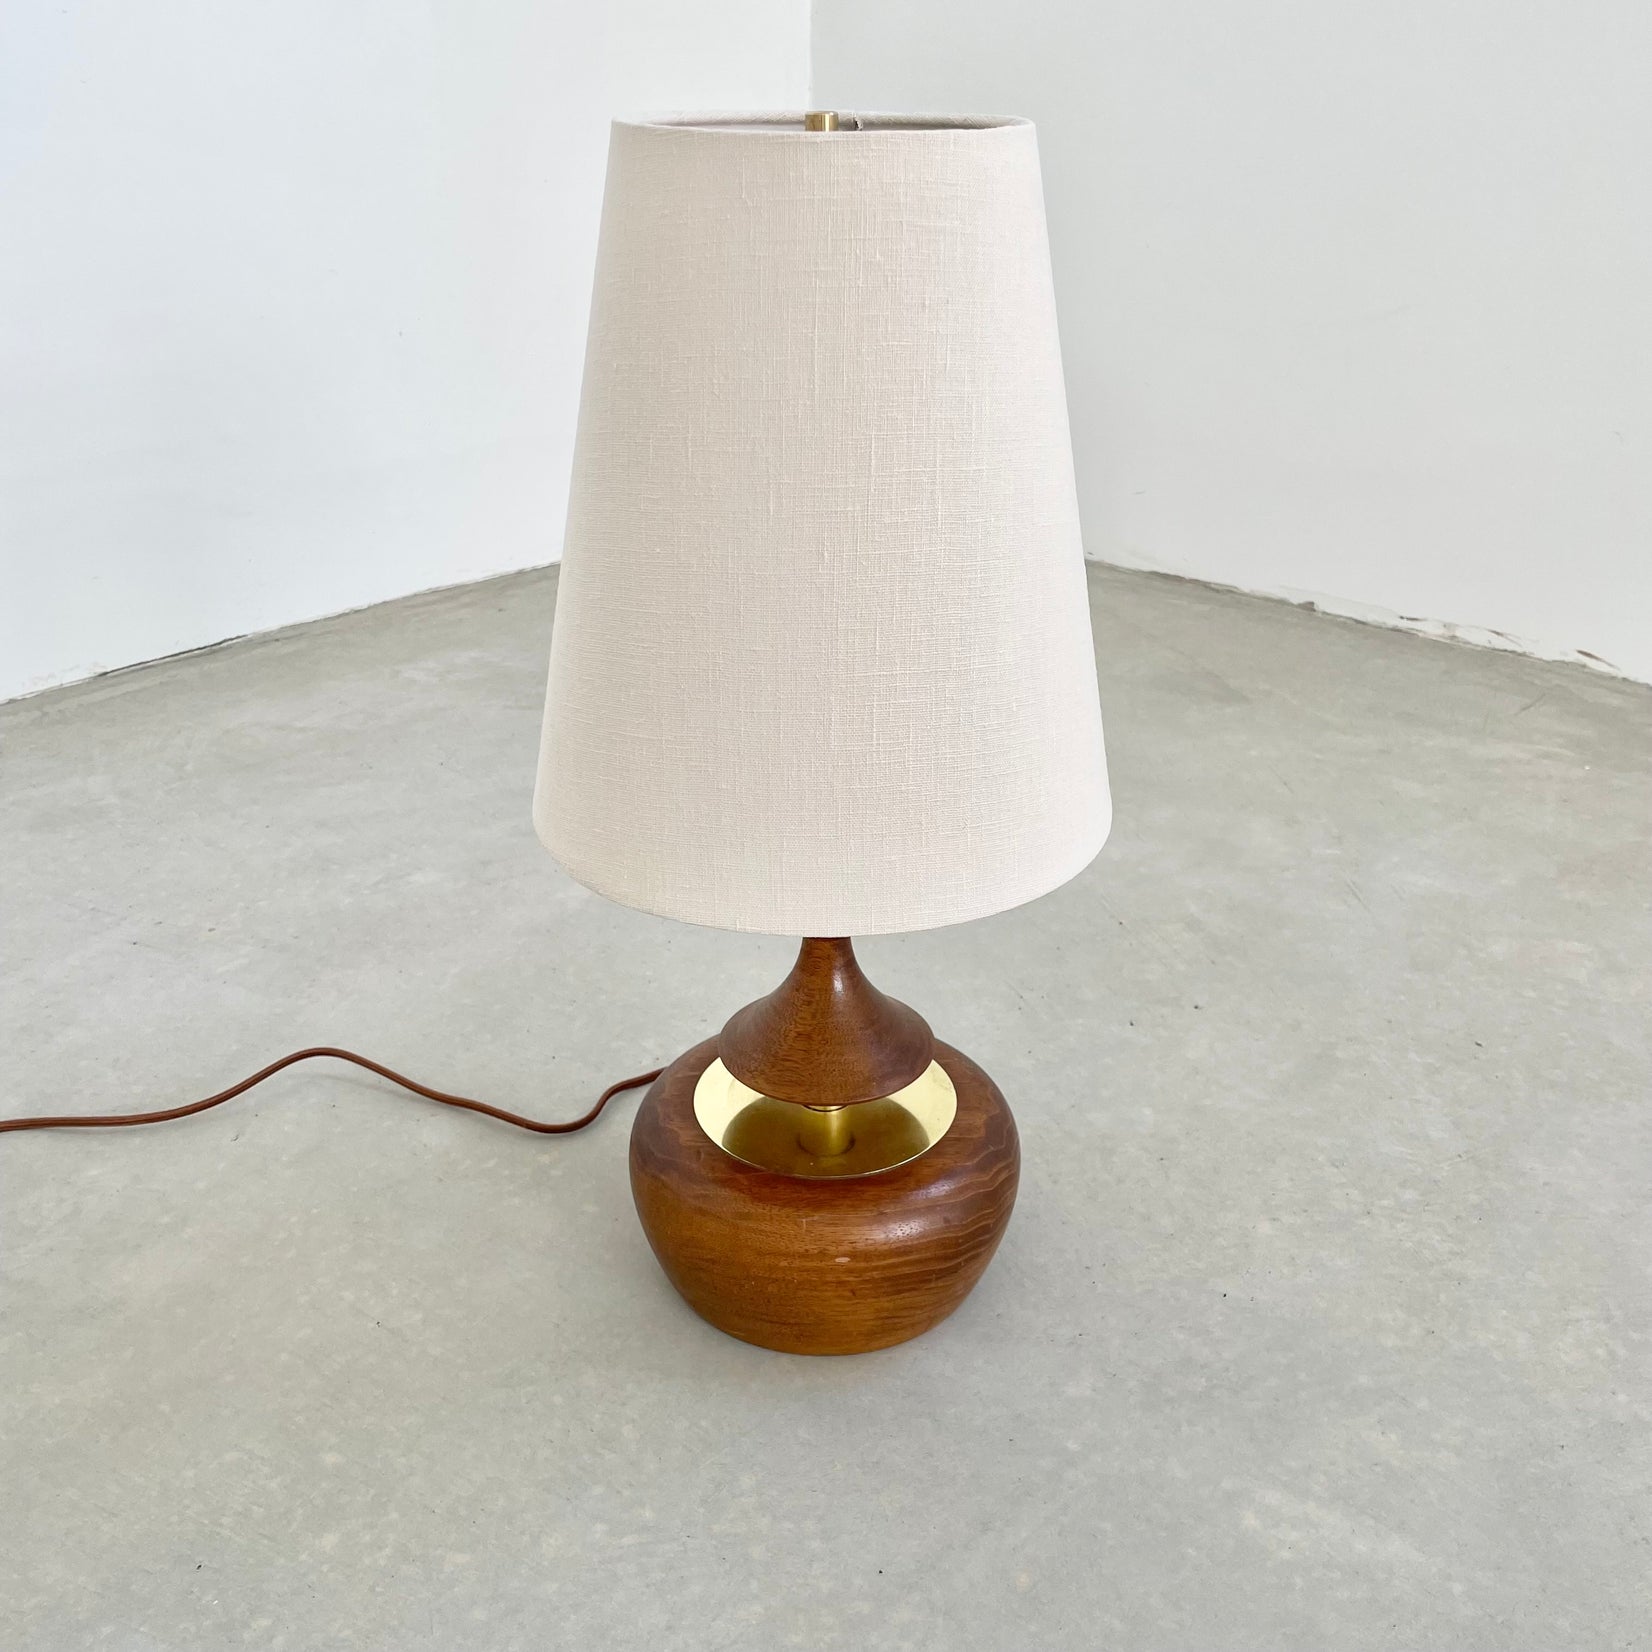 Walnut and Brass Push Table Lamp by Modeline of California